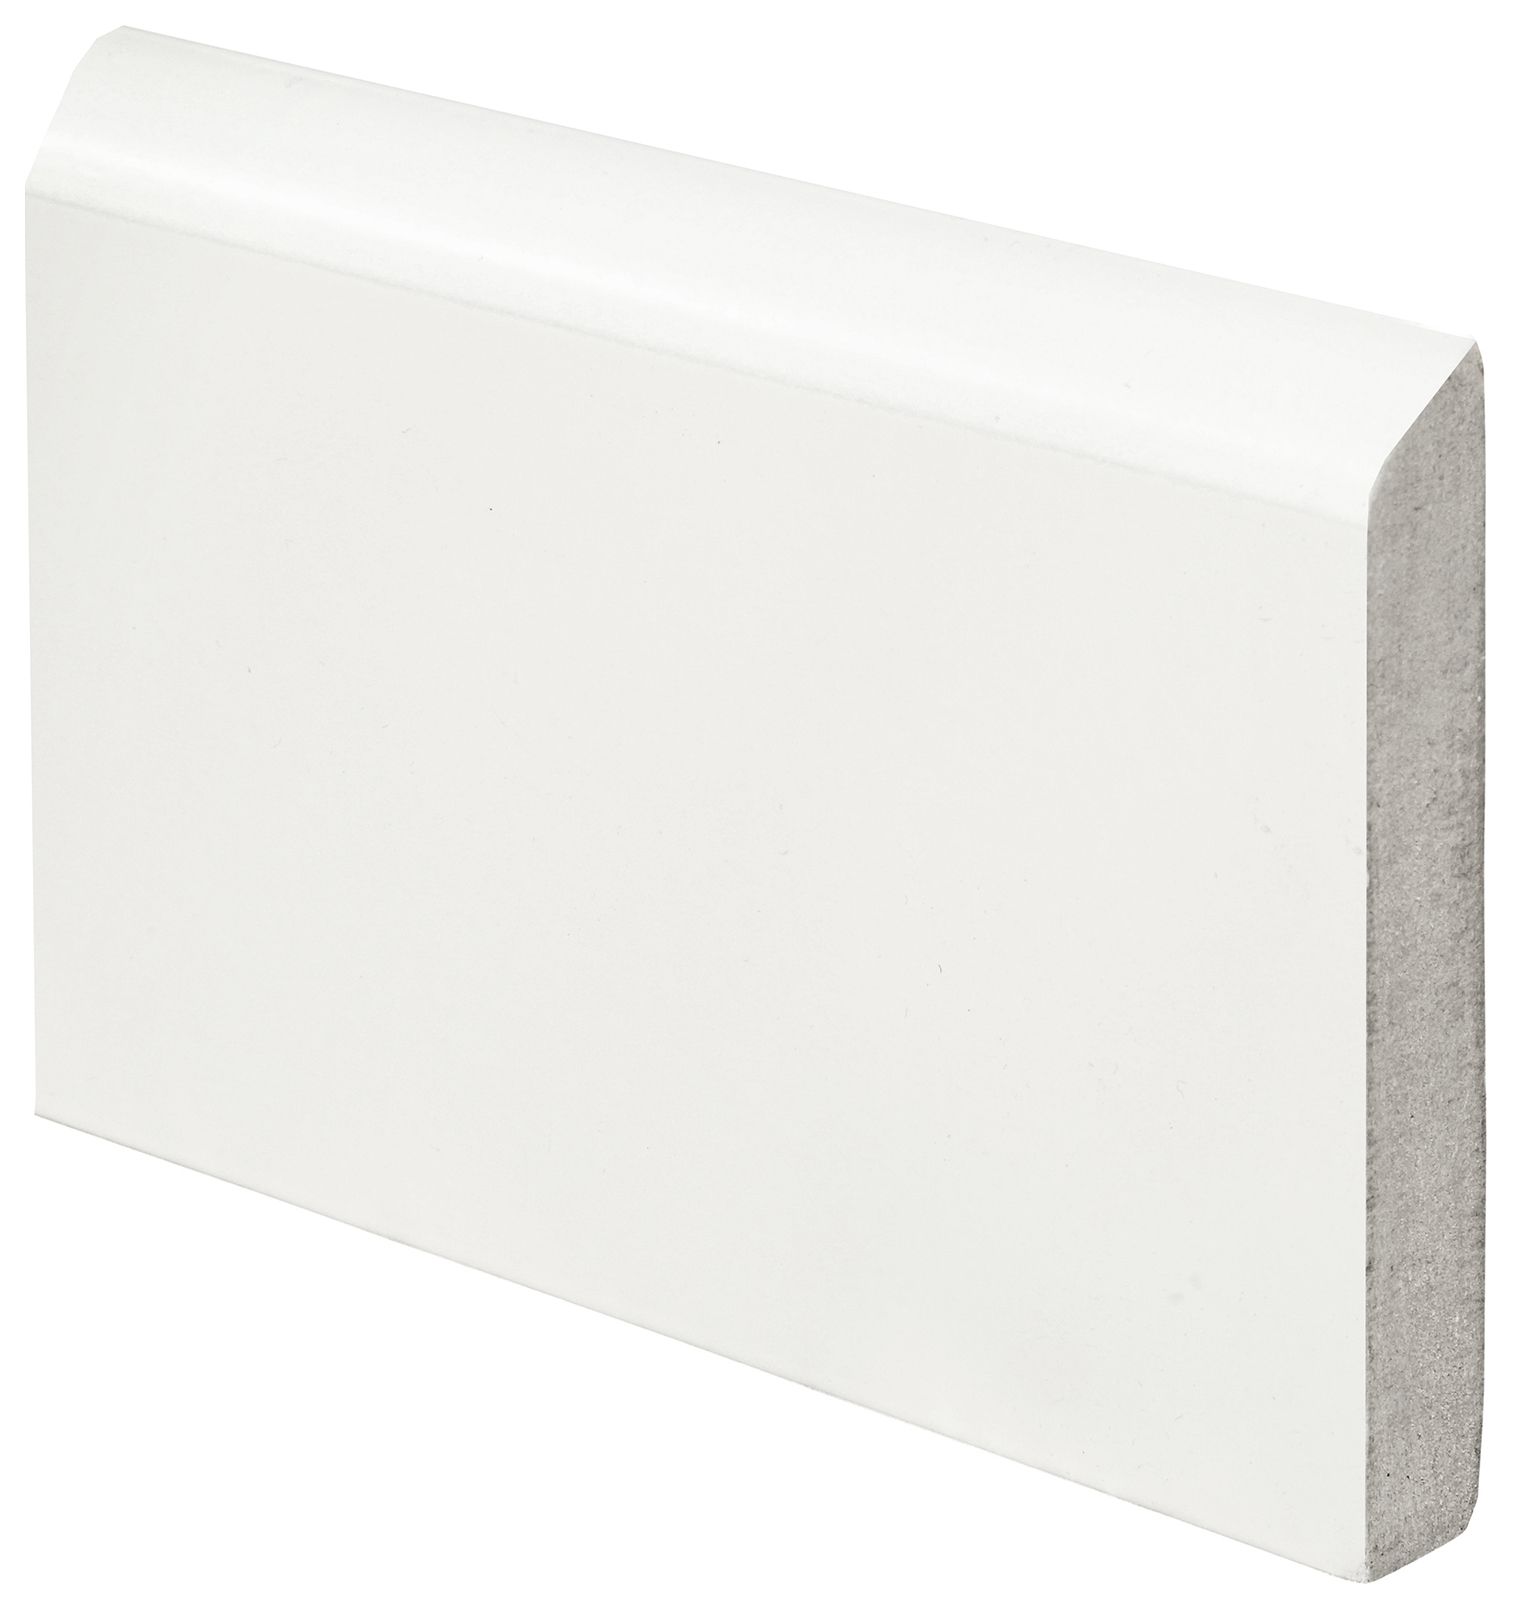 Image of Wickes Bullnose Fully Finished MDF Skirting 18 x 119 x 3660mm